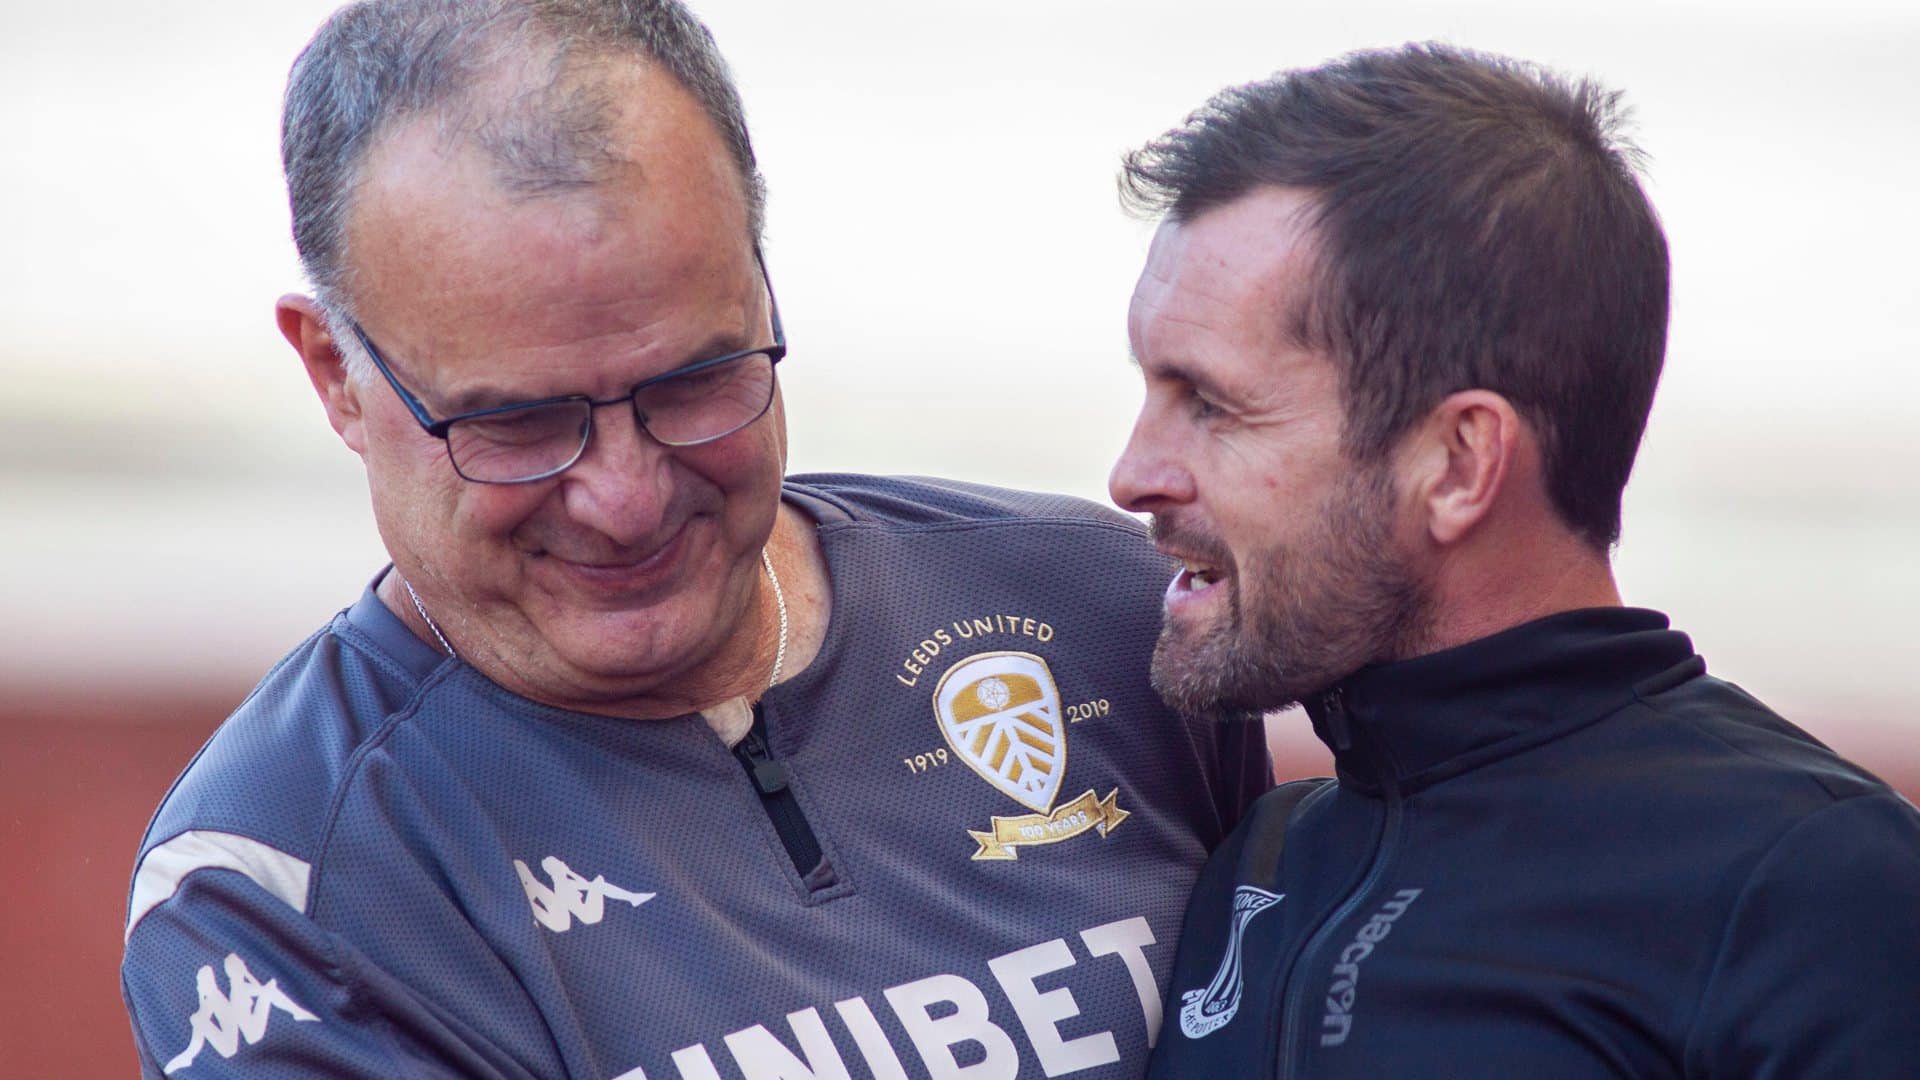 Looking cocky enough as usual, Nathan Jones is welcoming Marcelo Bielsa to Stoke before the game with Leeds in August 2019. Bielsa has the face of a man who knows his team is about to teach this weird nail-biting charlatan a football lesson